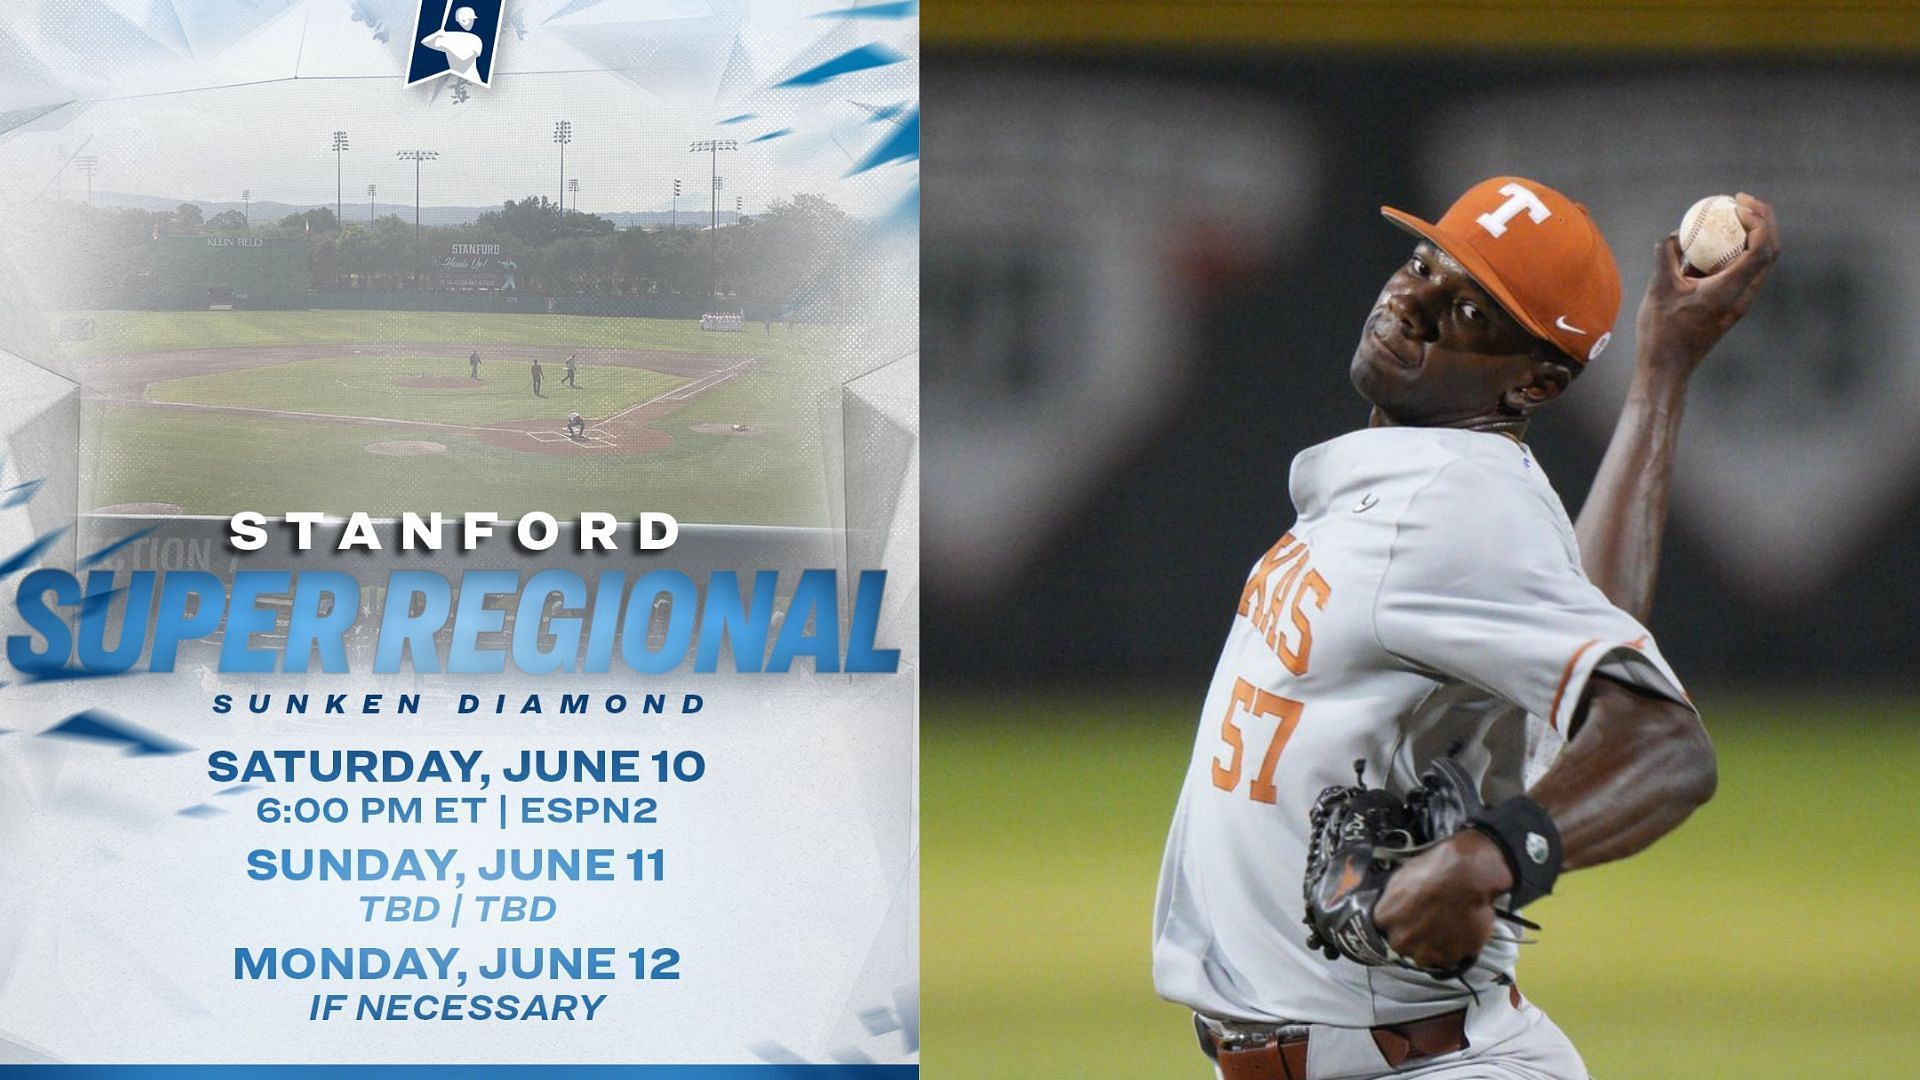 Stanford and Texas will square off in the Stanford Super Regional to determine who will advance in the NCAA baseball tournament